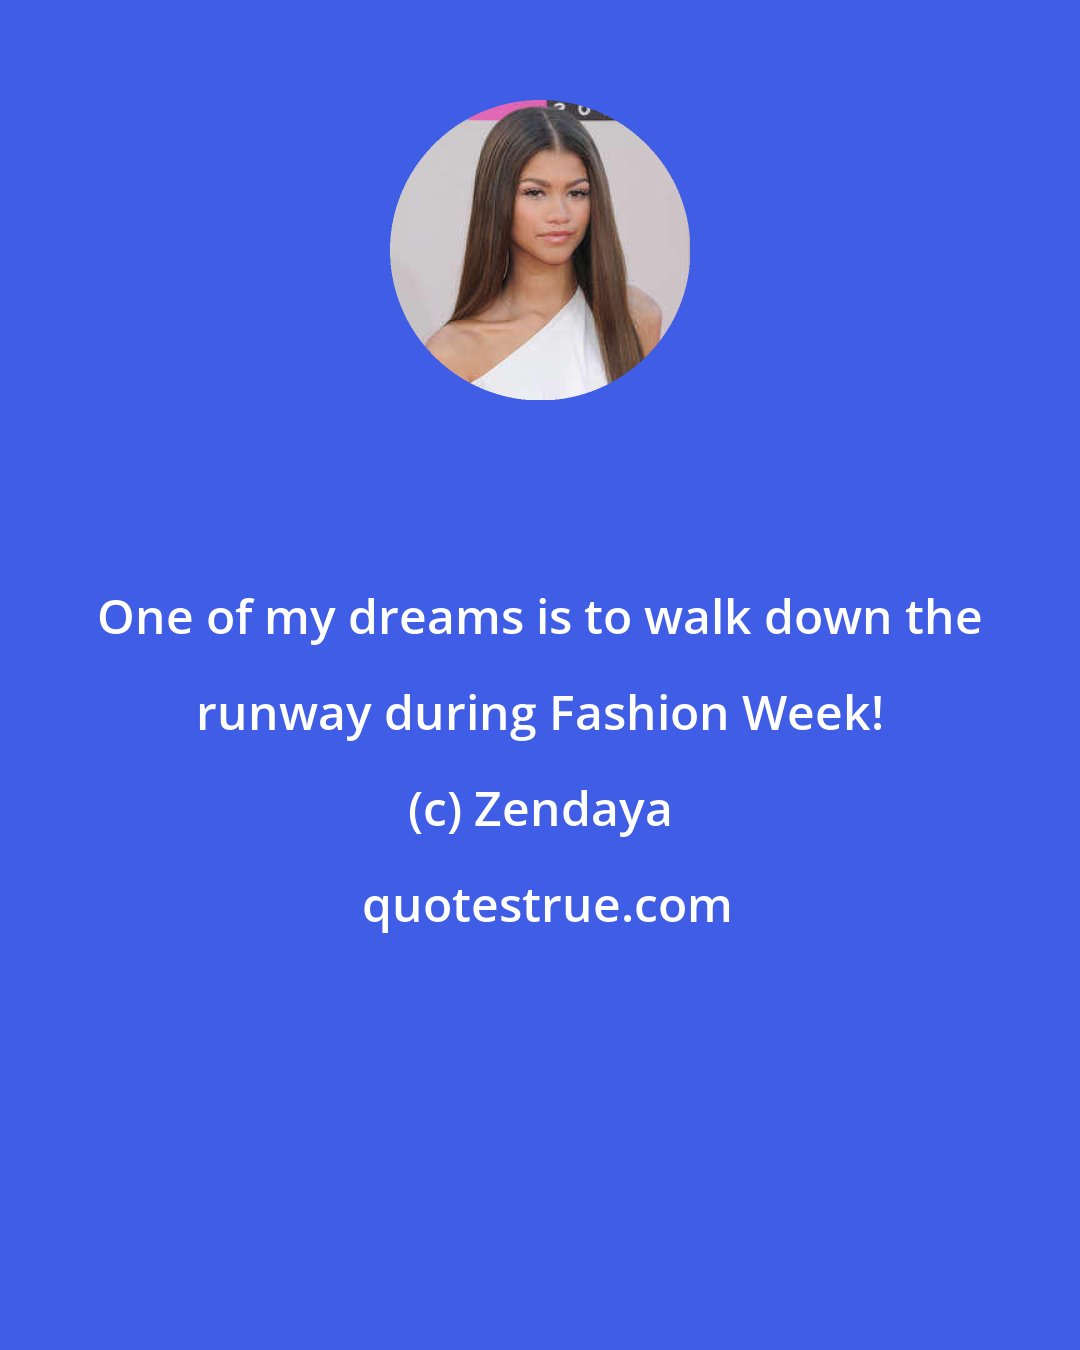 Zendaya: One of my dreams is to walk down the runway during Fashion Week!